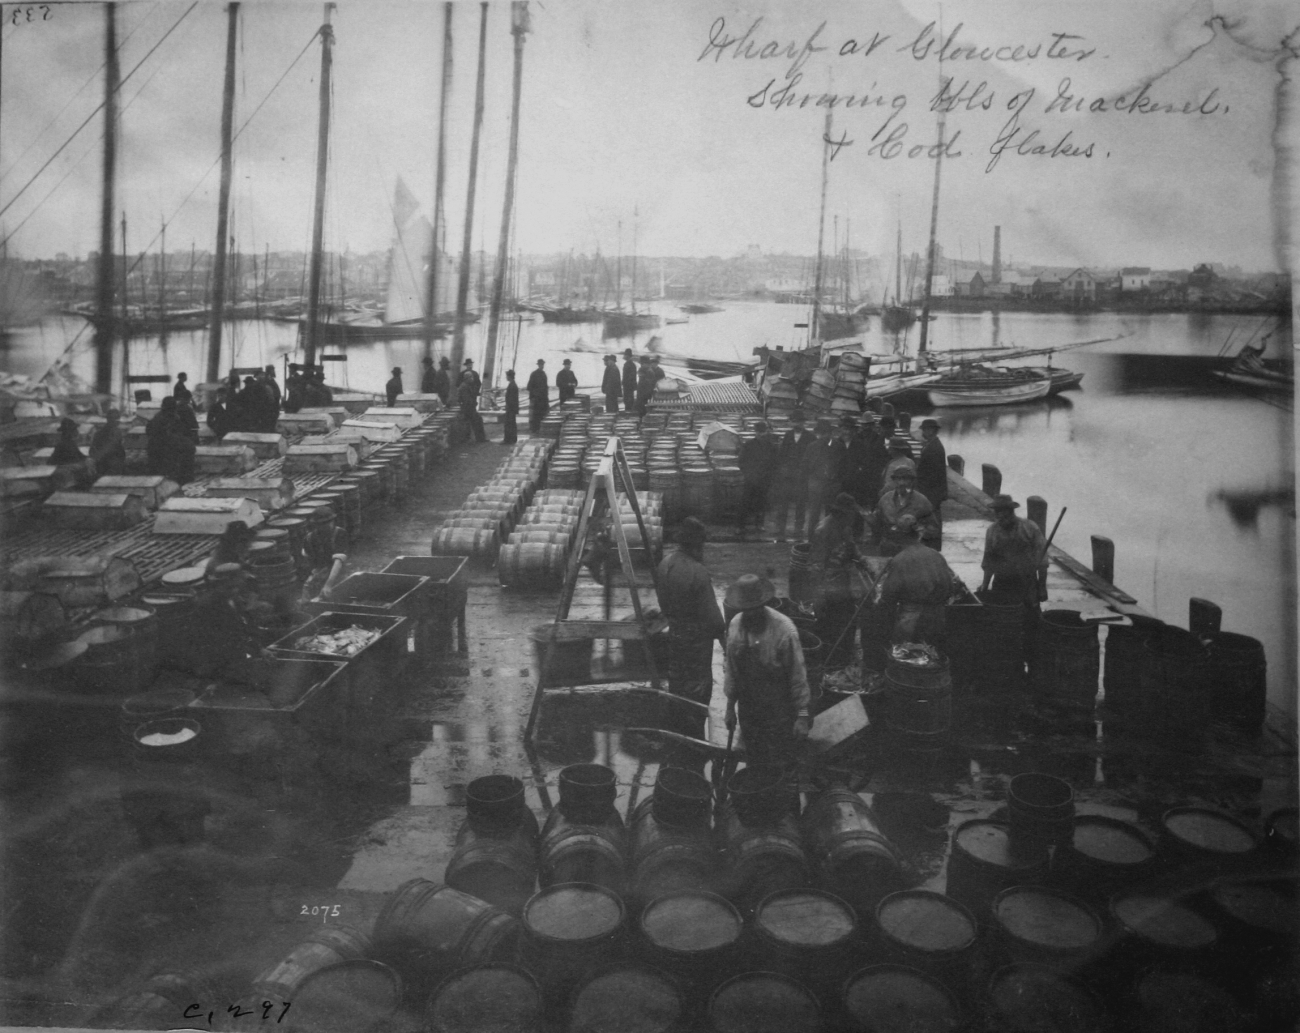 Wharf at Gloucester, MA showing bbls of mackerel and cod flakes